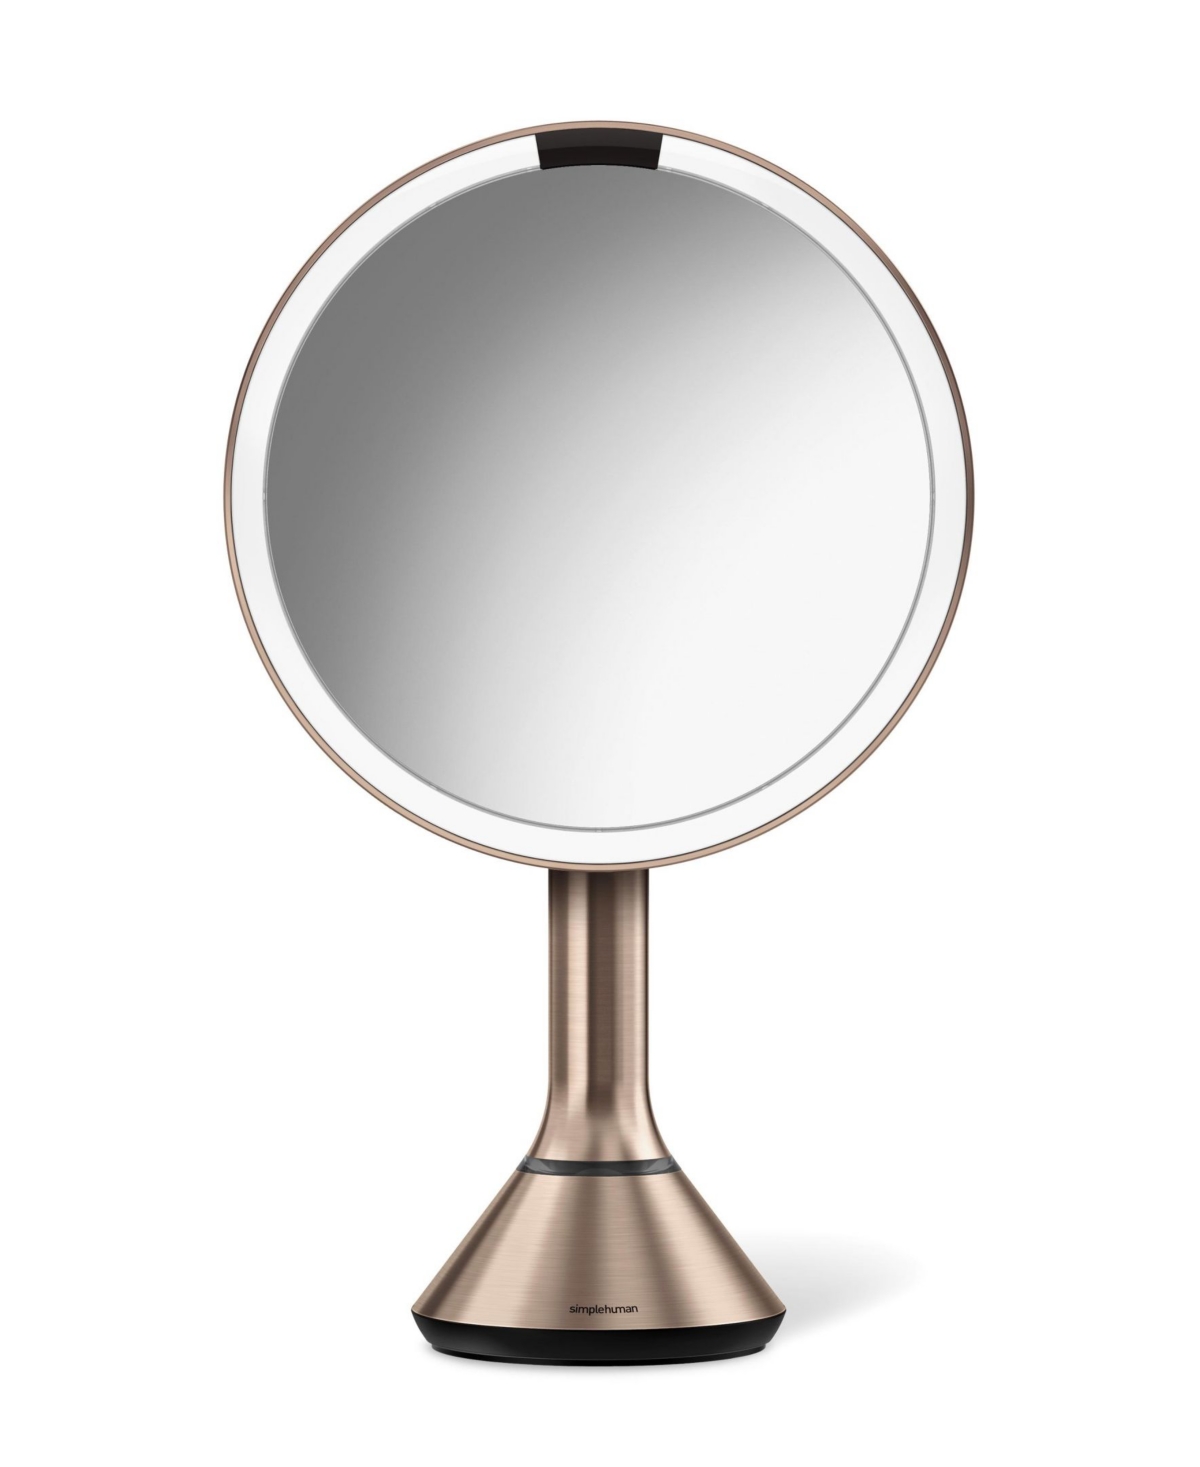 Simplehuman 8" Round Sensor Makeup Mirror With Touch-control Dual Light Settings In Rose Gold